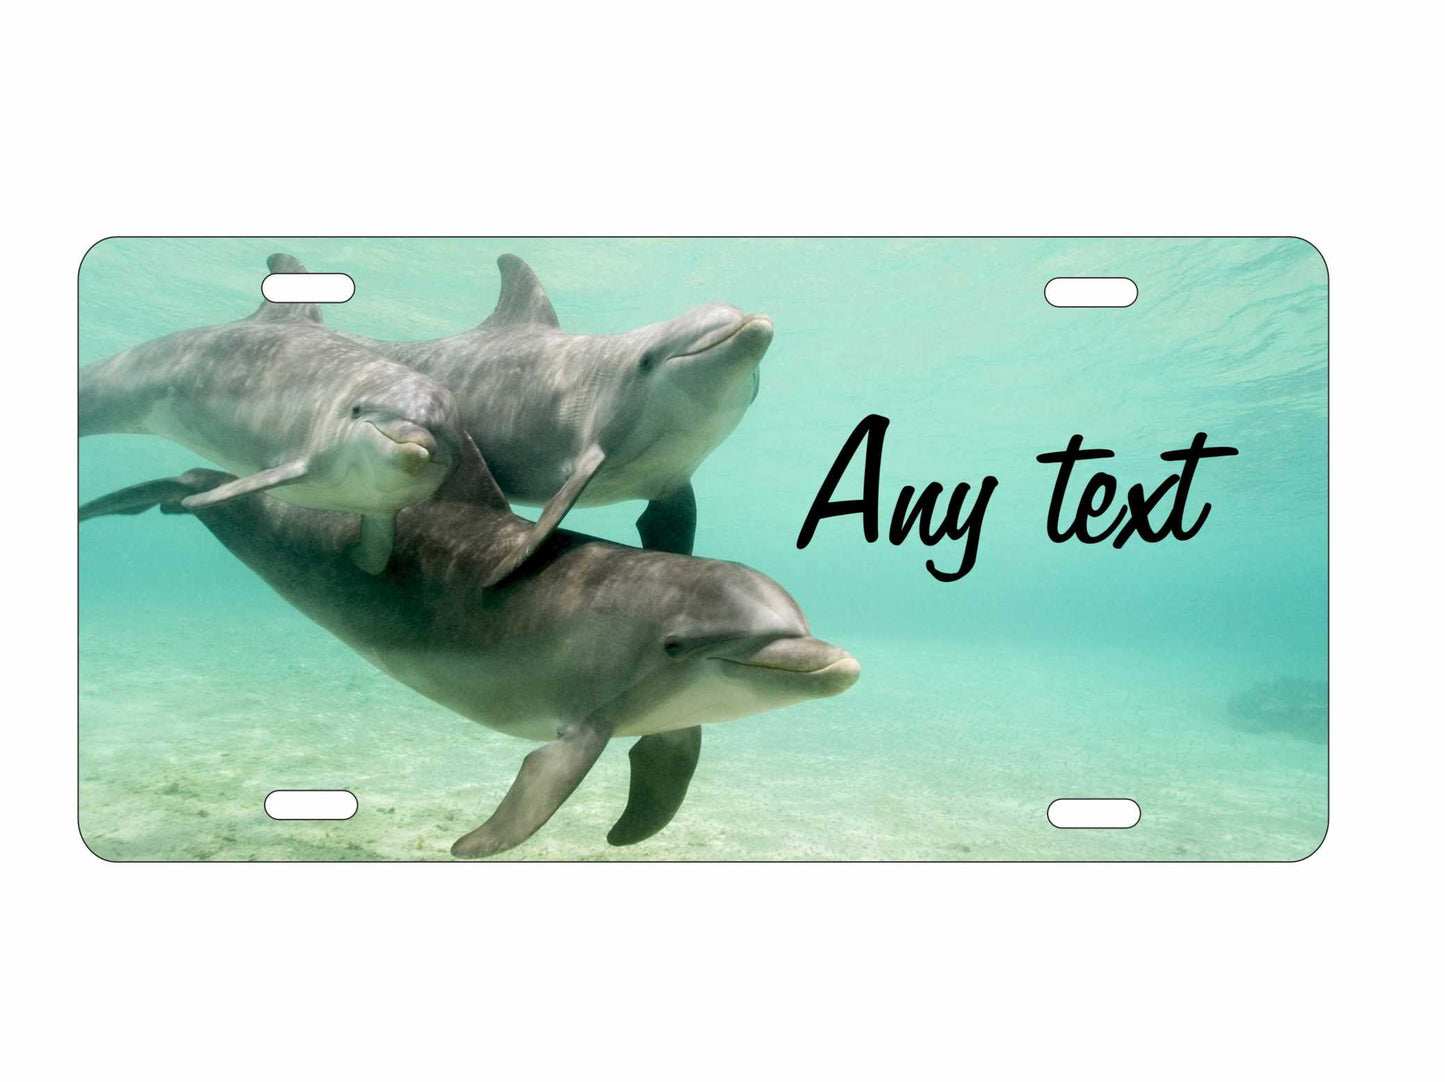 Dolphins Underwater personalized novelty front license plate Decorative Vanity custom car tag